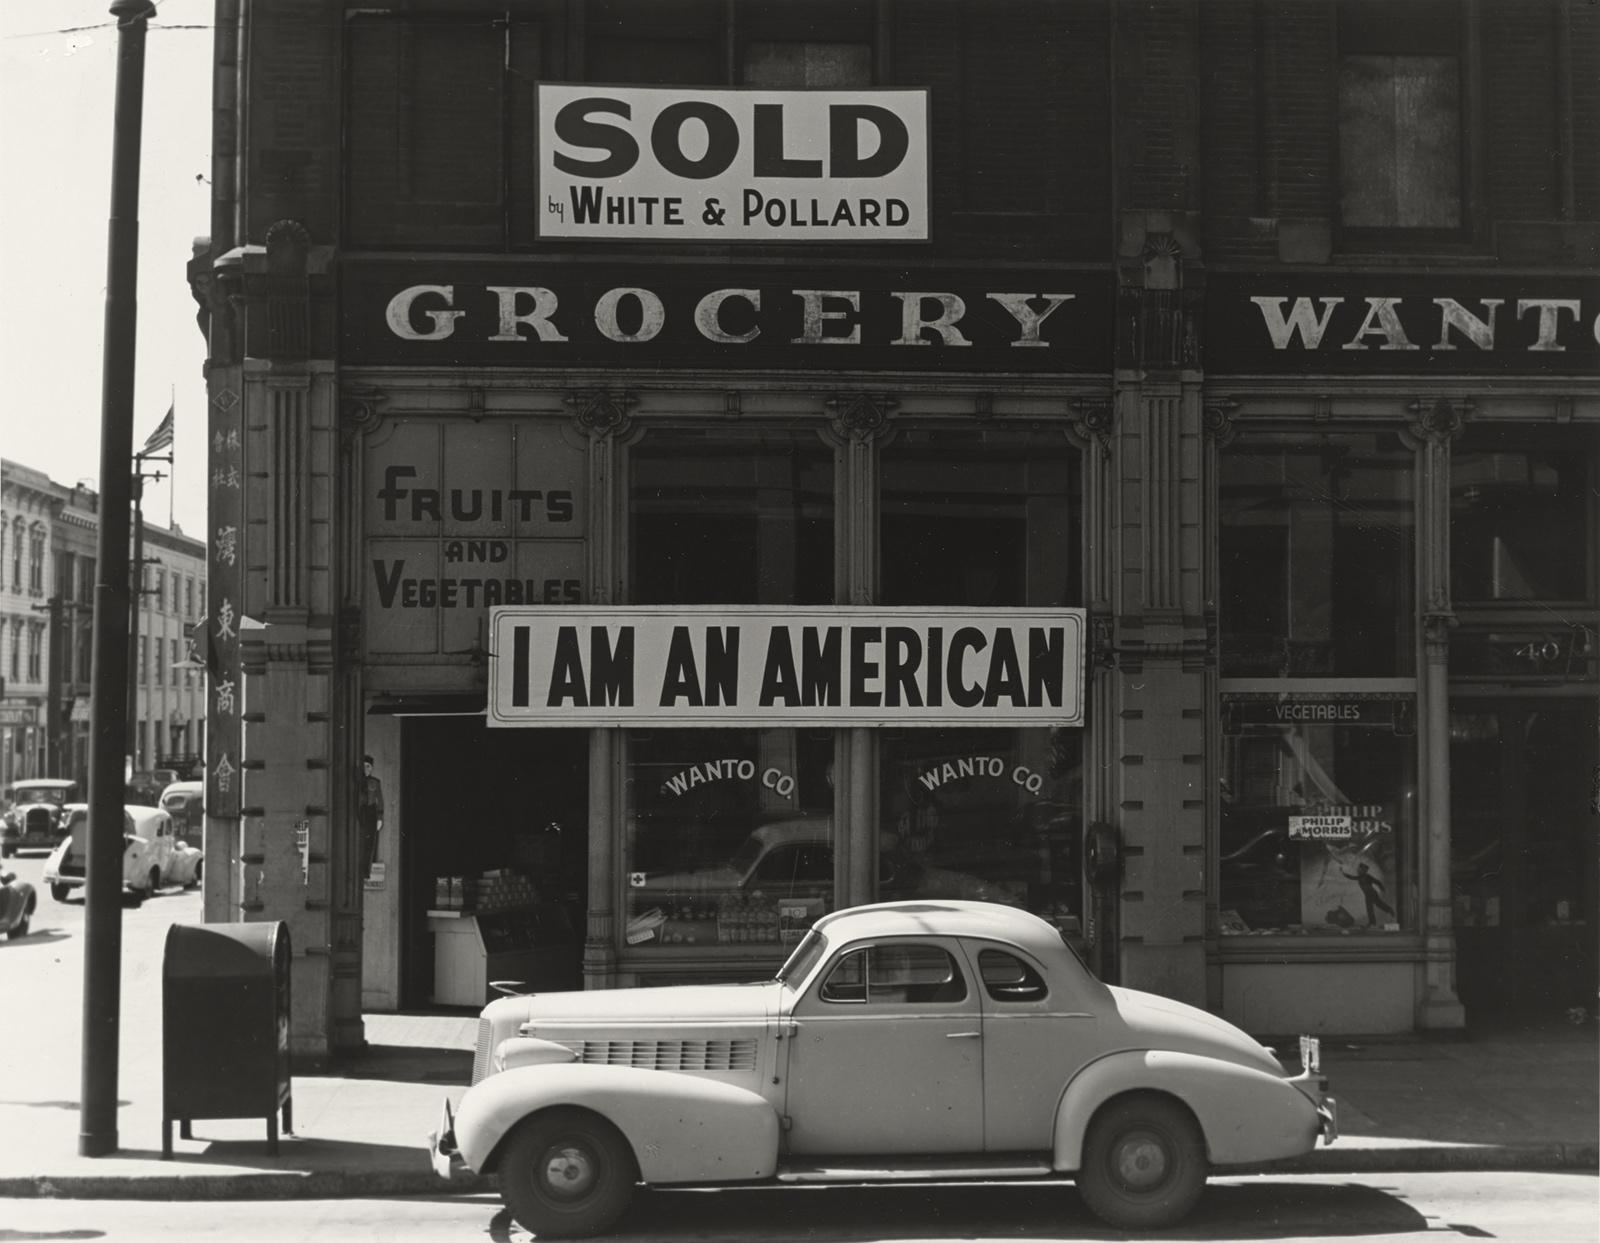 Dorothea Lange (American, 1895–1965), Japanese-American owned grocery store, Oakland, California, March 1942. Gelatin silver print. 7 1/2 x 9 5/8 in (19 x 24.5 cm). National Gallery of Art, Washington, DC.